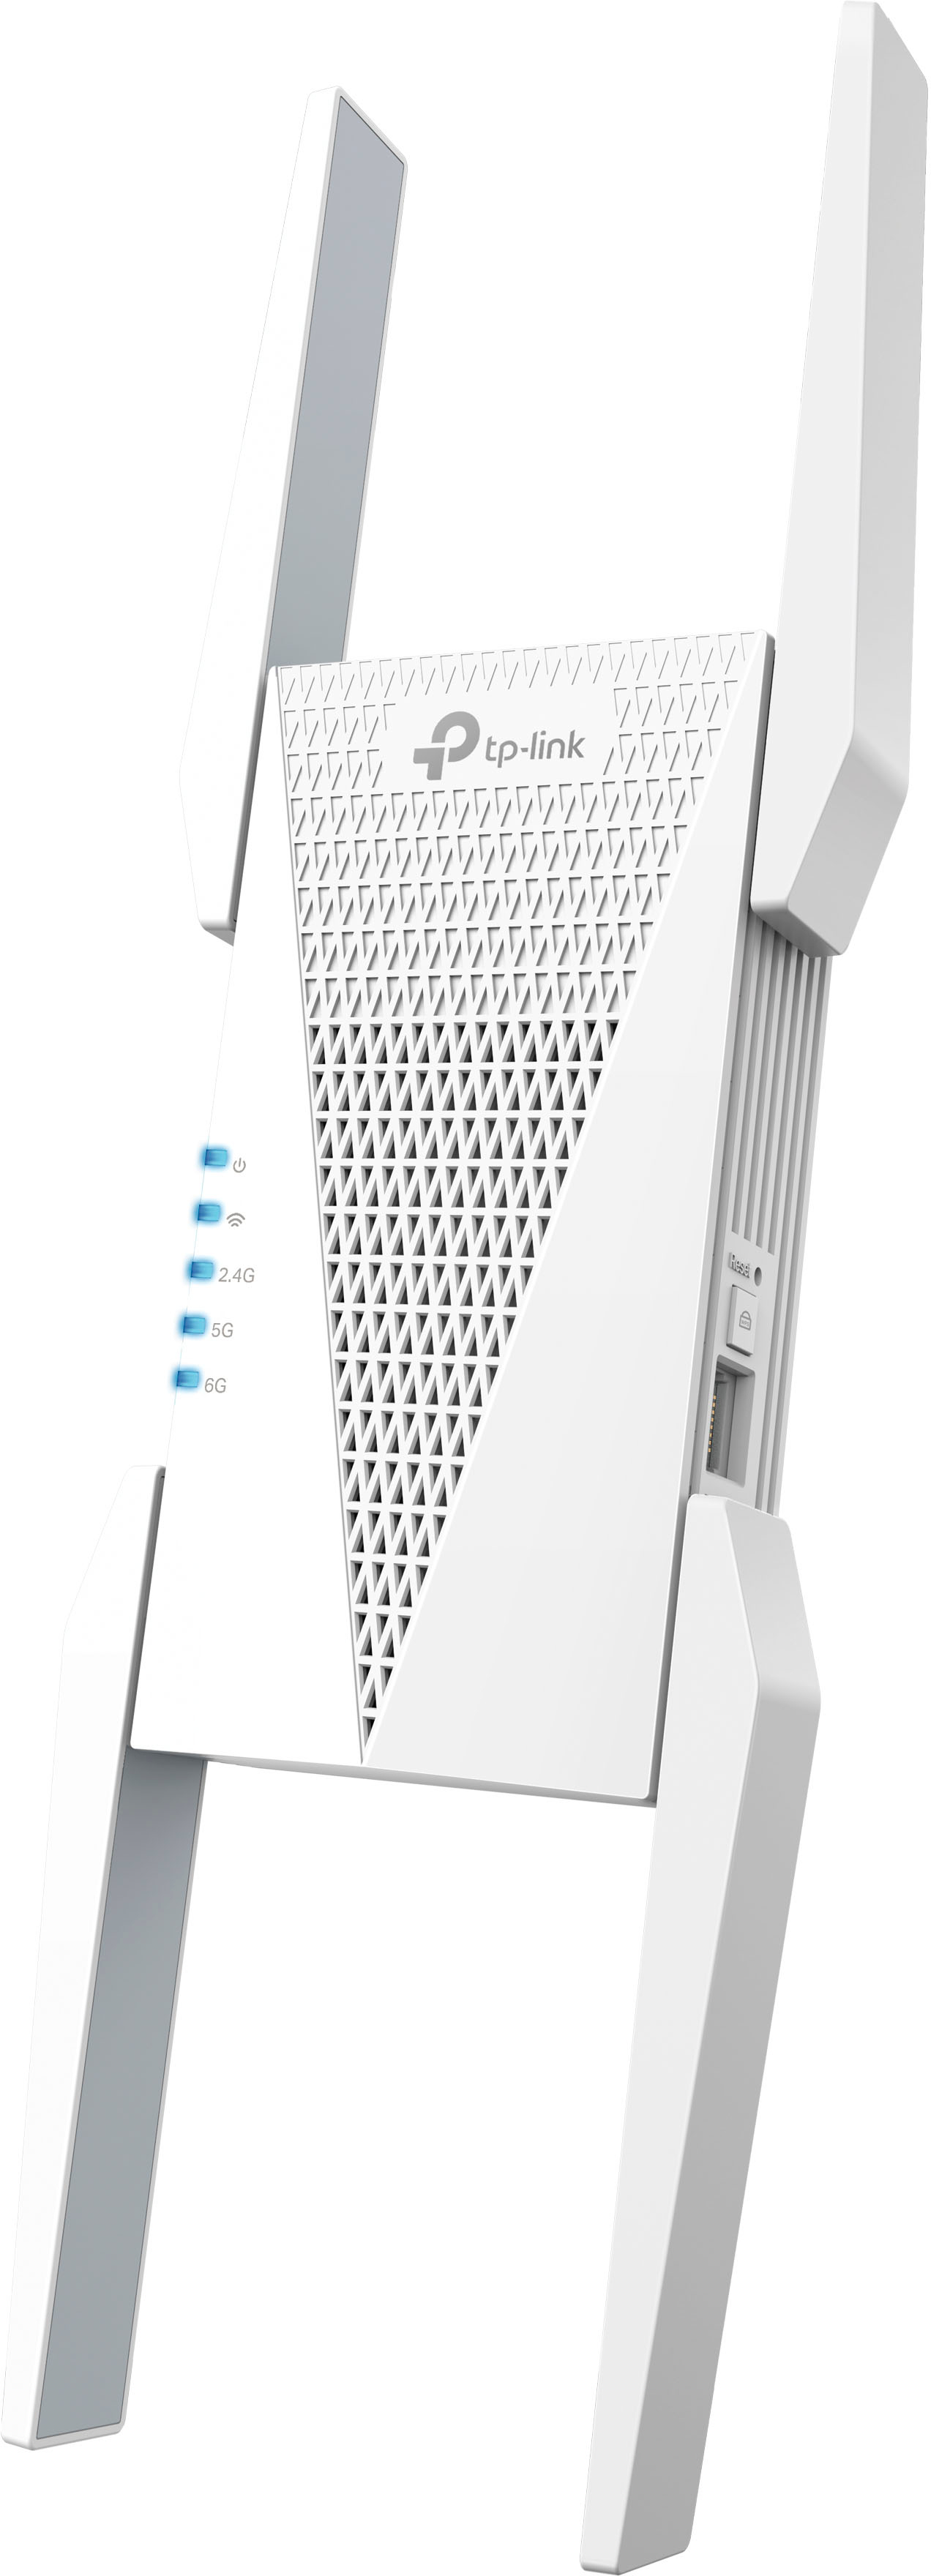 TP-Link adds WiFi 7 mesh extenders to its oddly robust WiFi 7 lineup